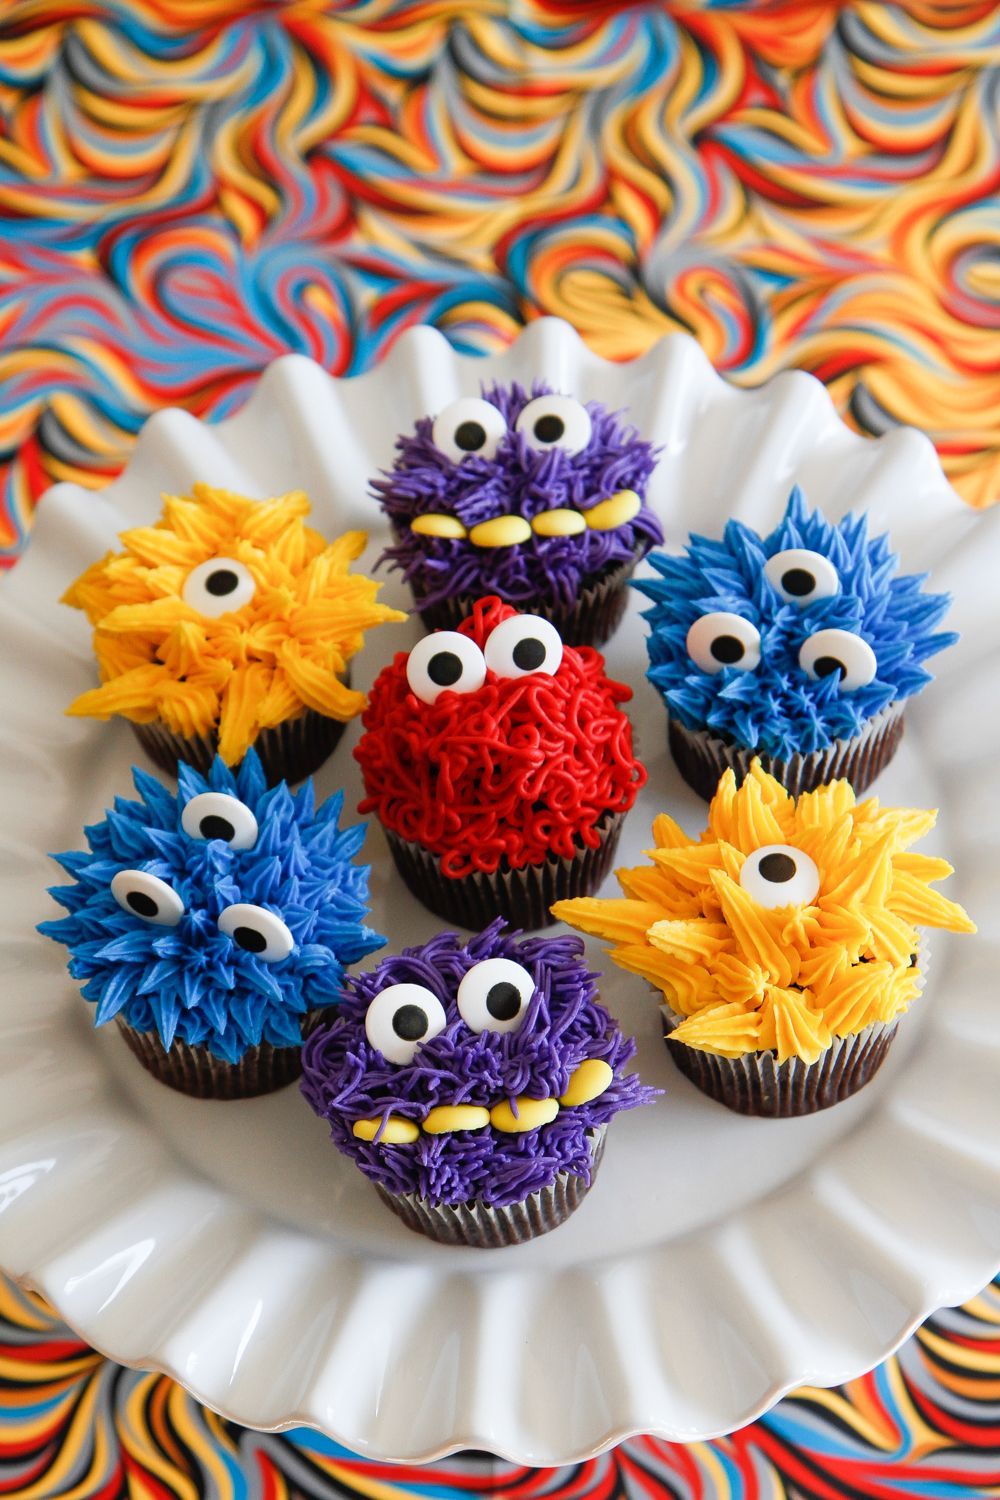 MONSTER-IFFIC CUPCAKES – Cute little monster cupcakes for a little boys birthday. Chocolate cupcakes with buttercream – really